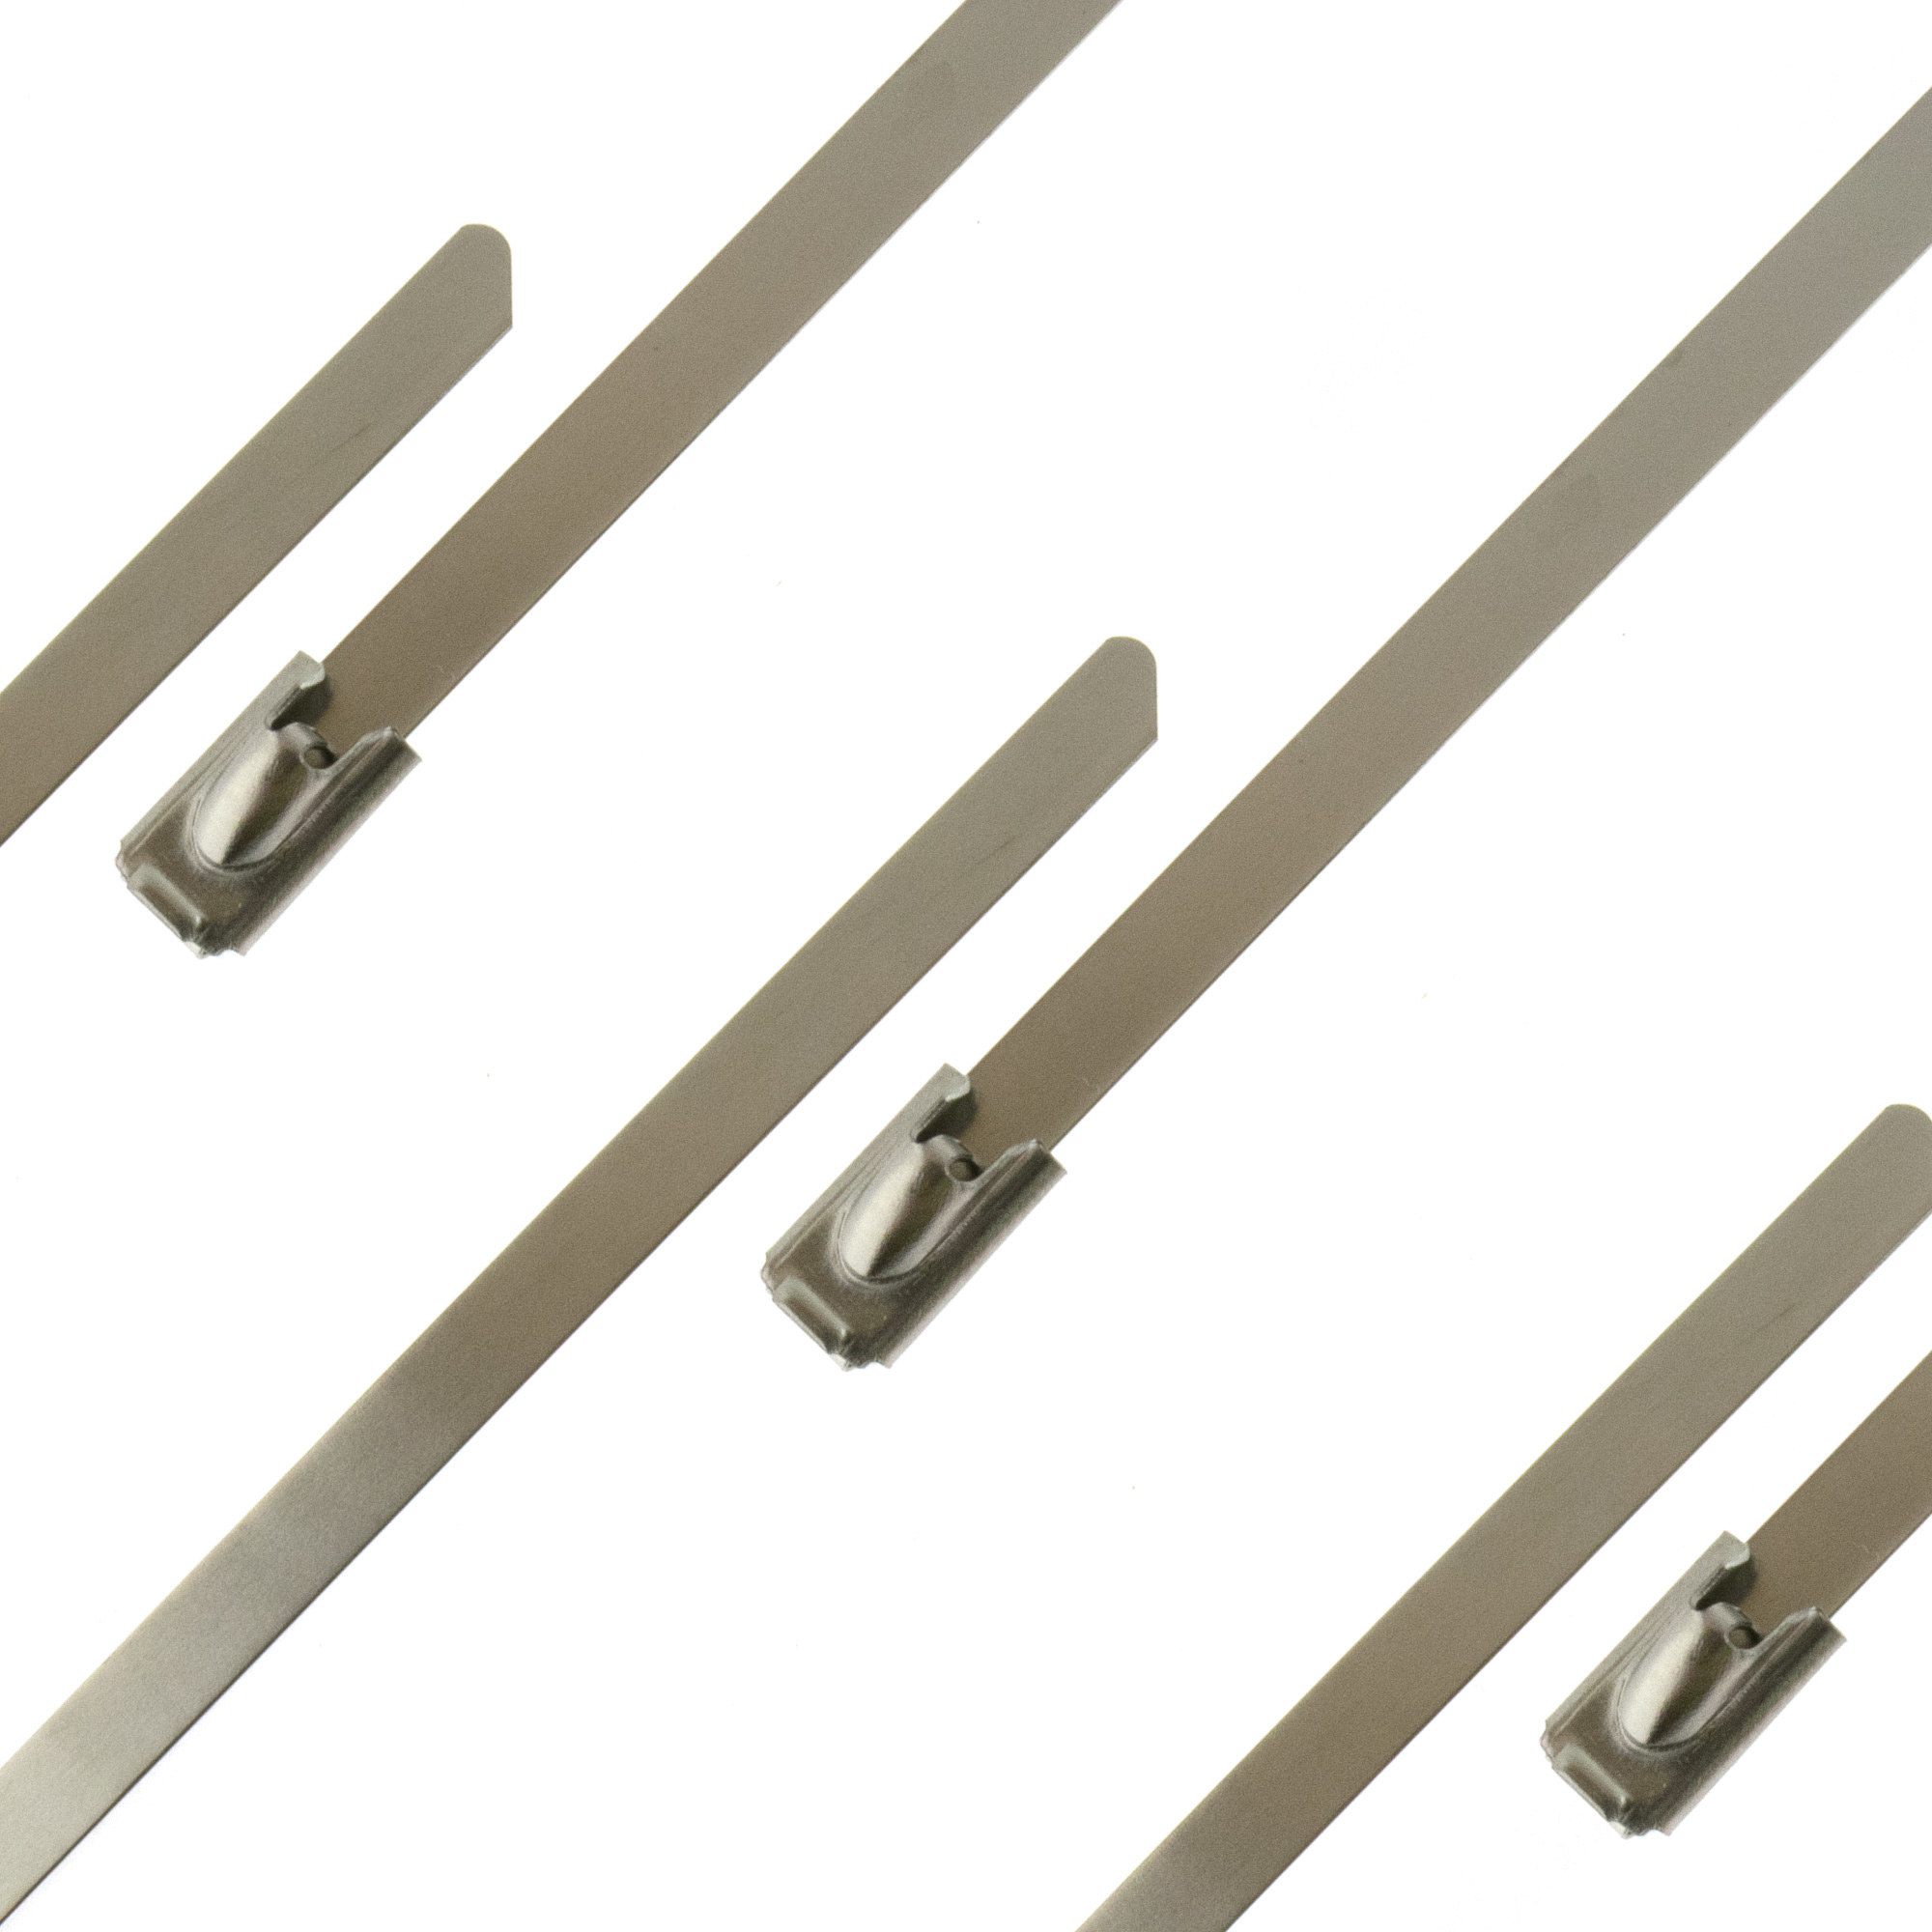 Cable tie metal ball-lock 125 x 4,6mm, 100PCS